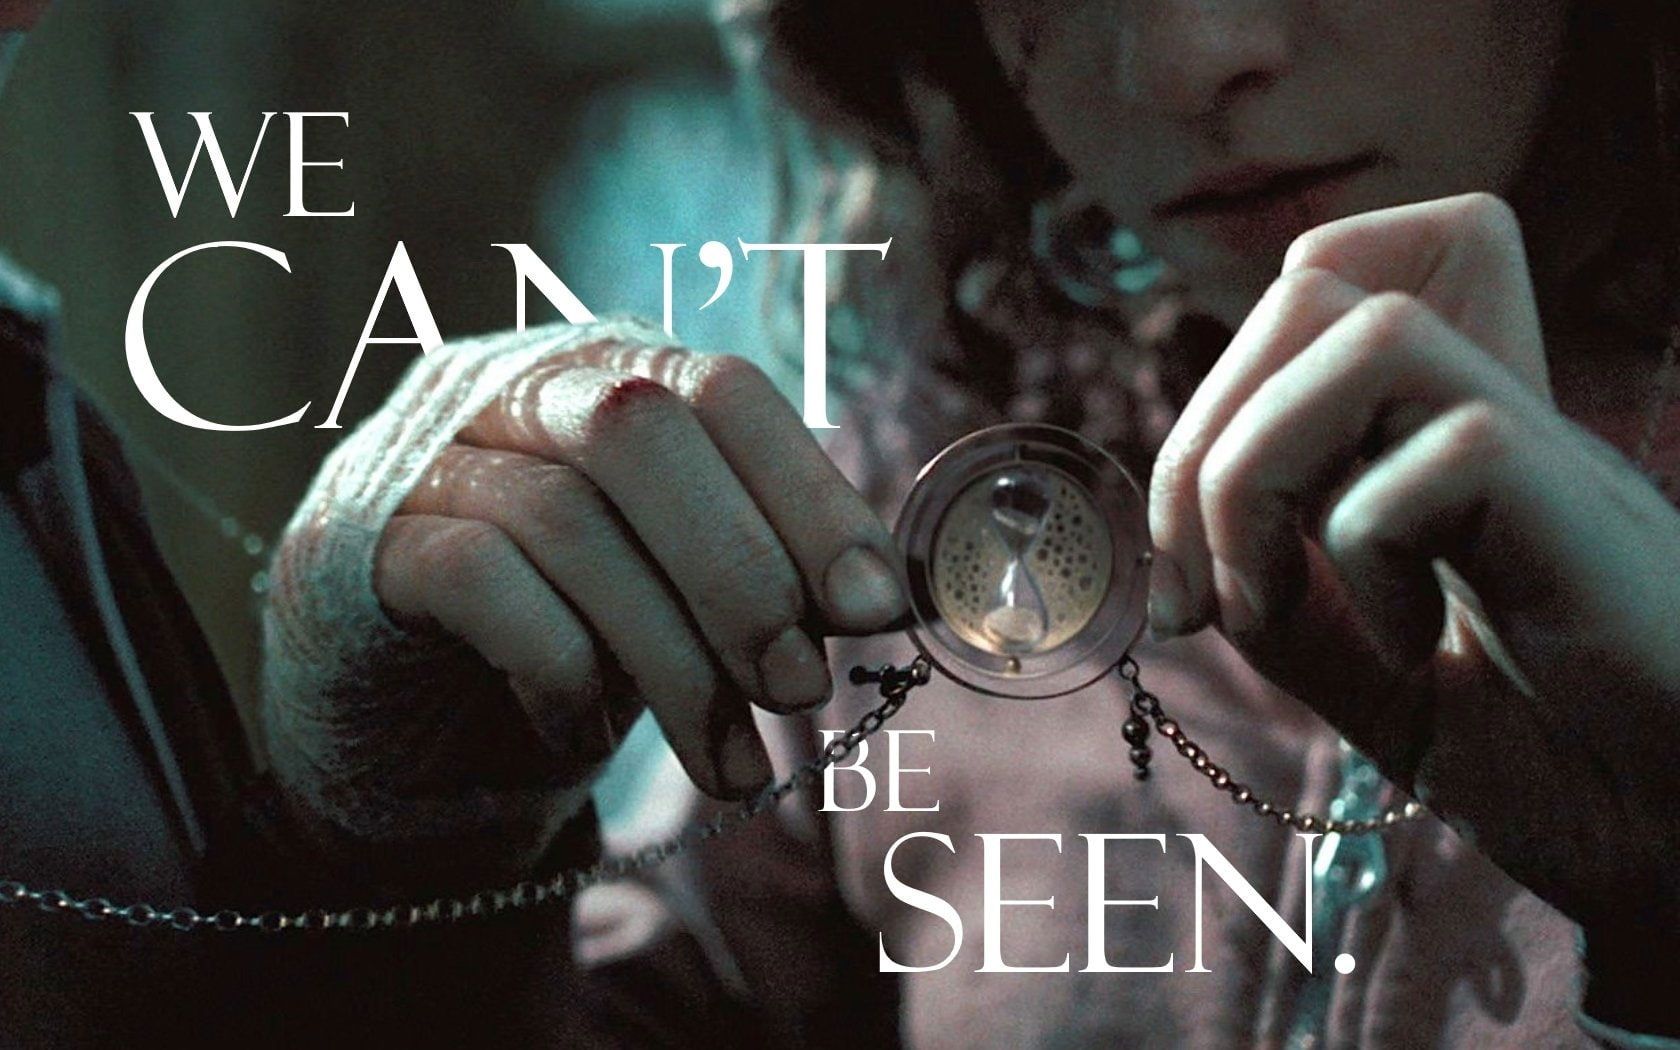 The poster for the film We Can't Be Seen. A woman's hands are holding a pocket watch. The text over the image reads 